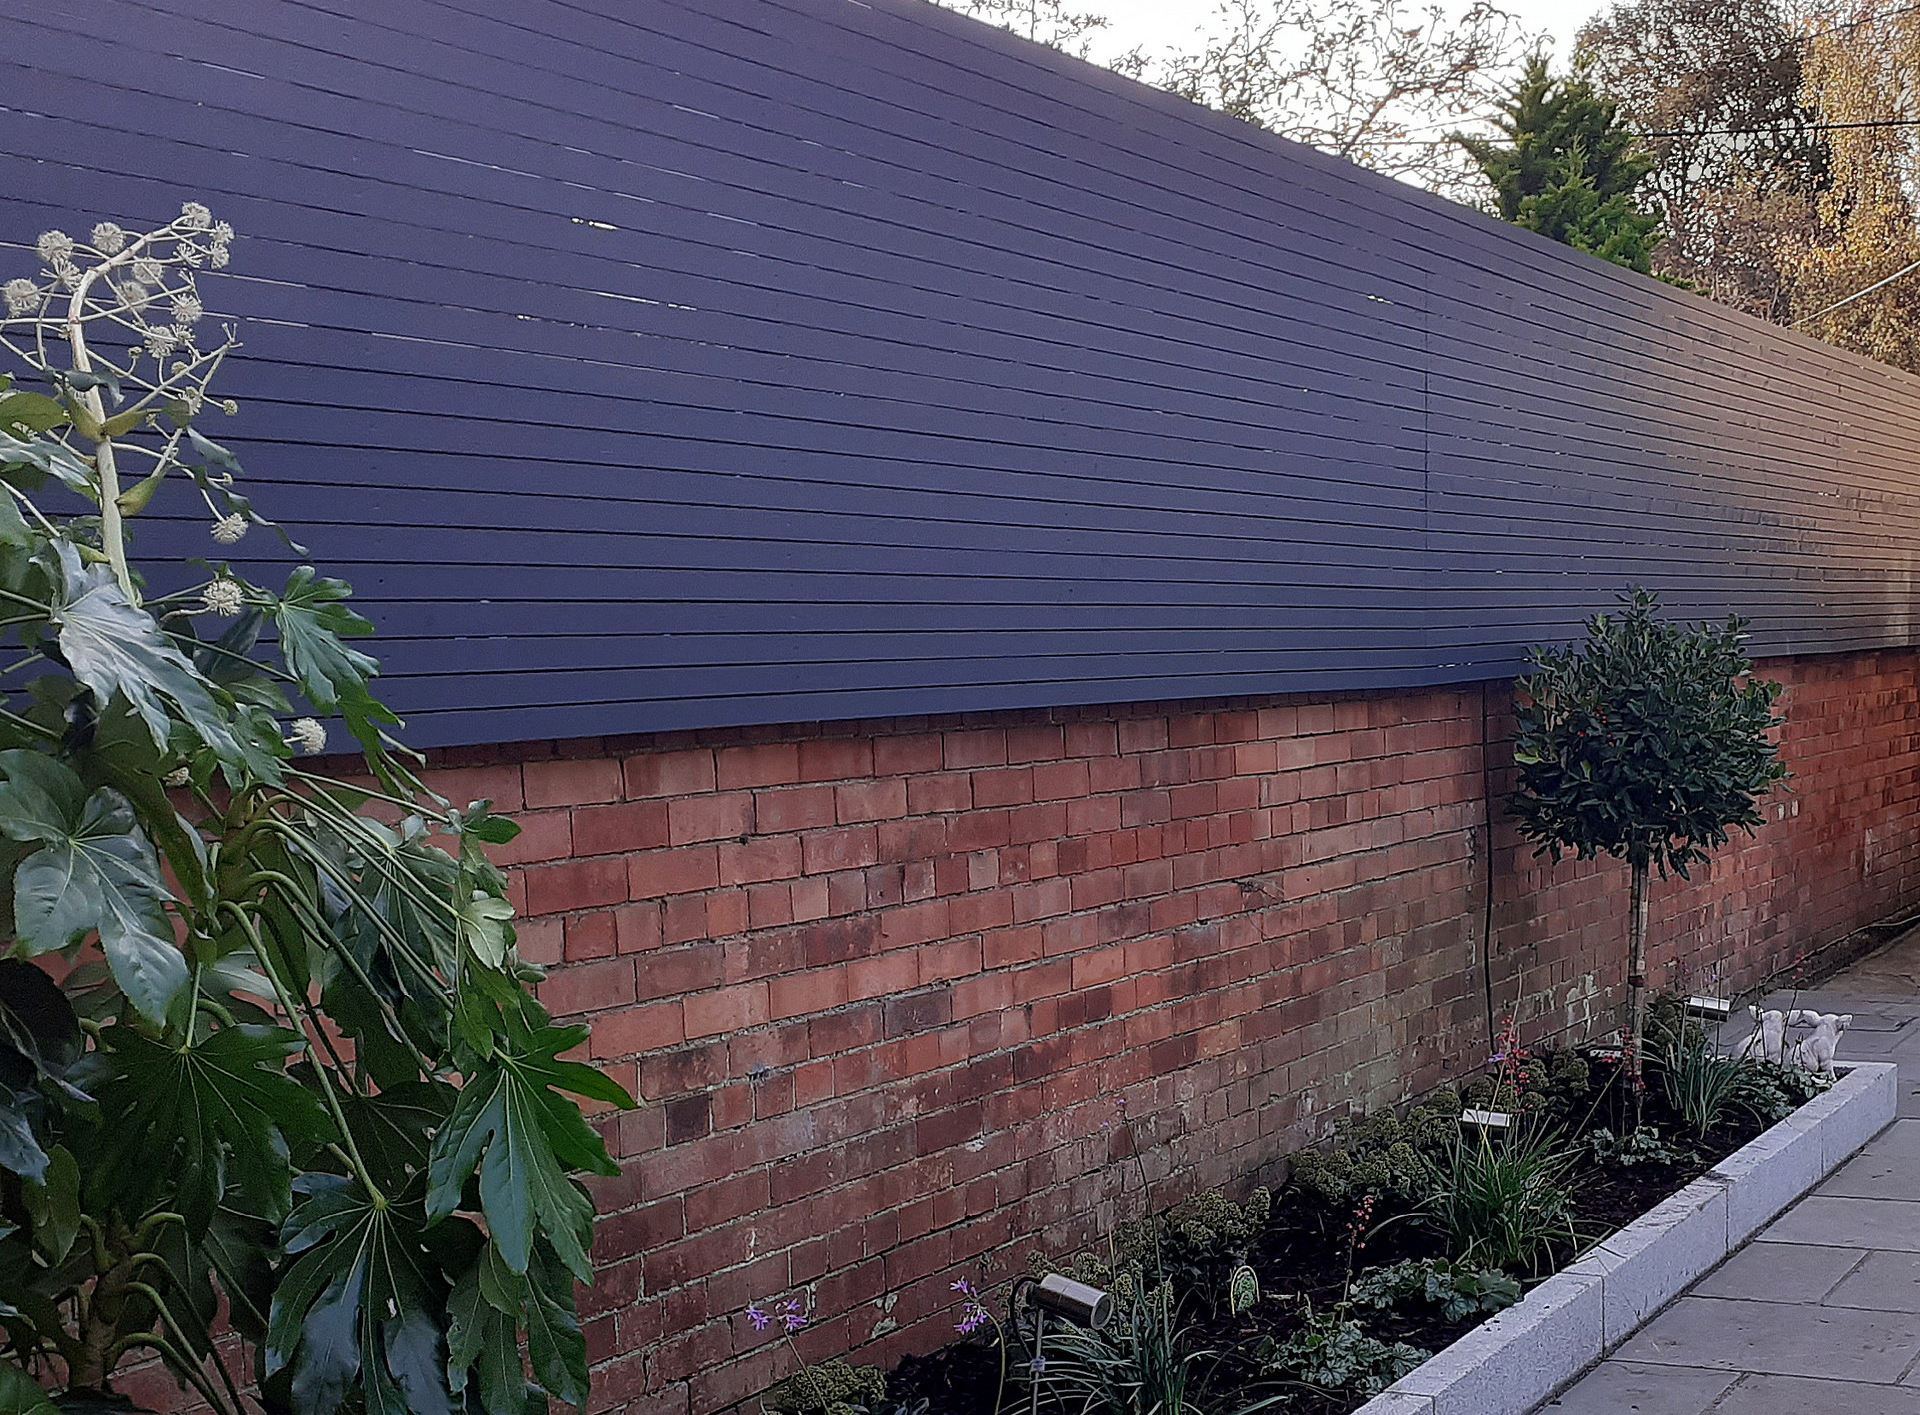 Horizontal Slat Fencing in Rathgar, Dublin 6. We have extensive experience in design & installation of custom made solutions, tailored to meet the specific requirements of each customer.  We belive custom made = Better made.